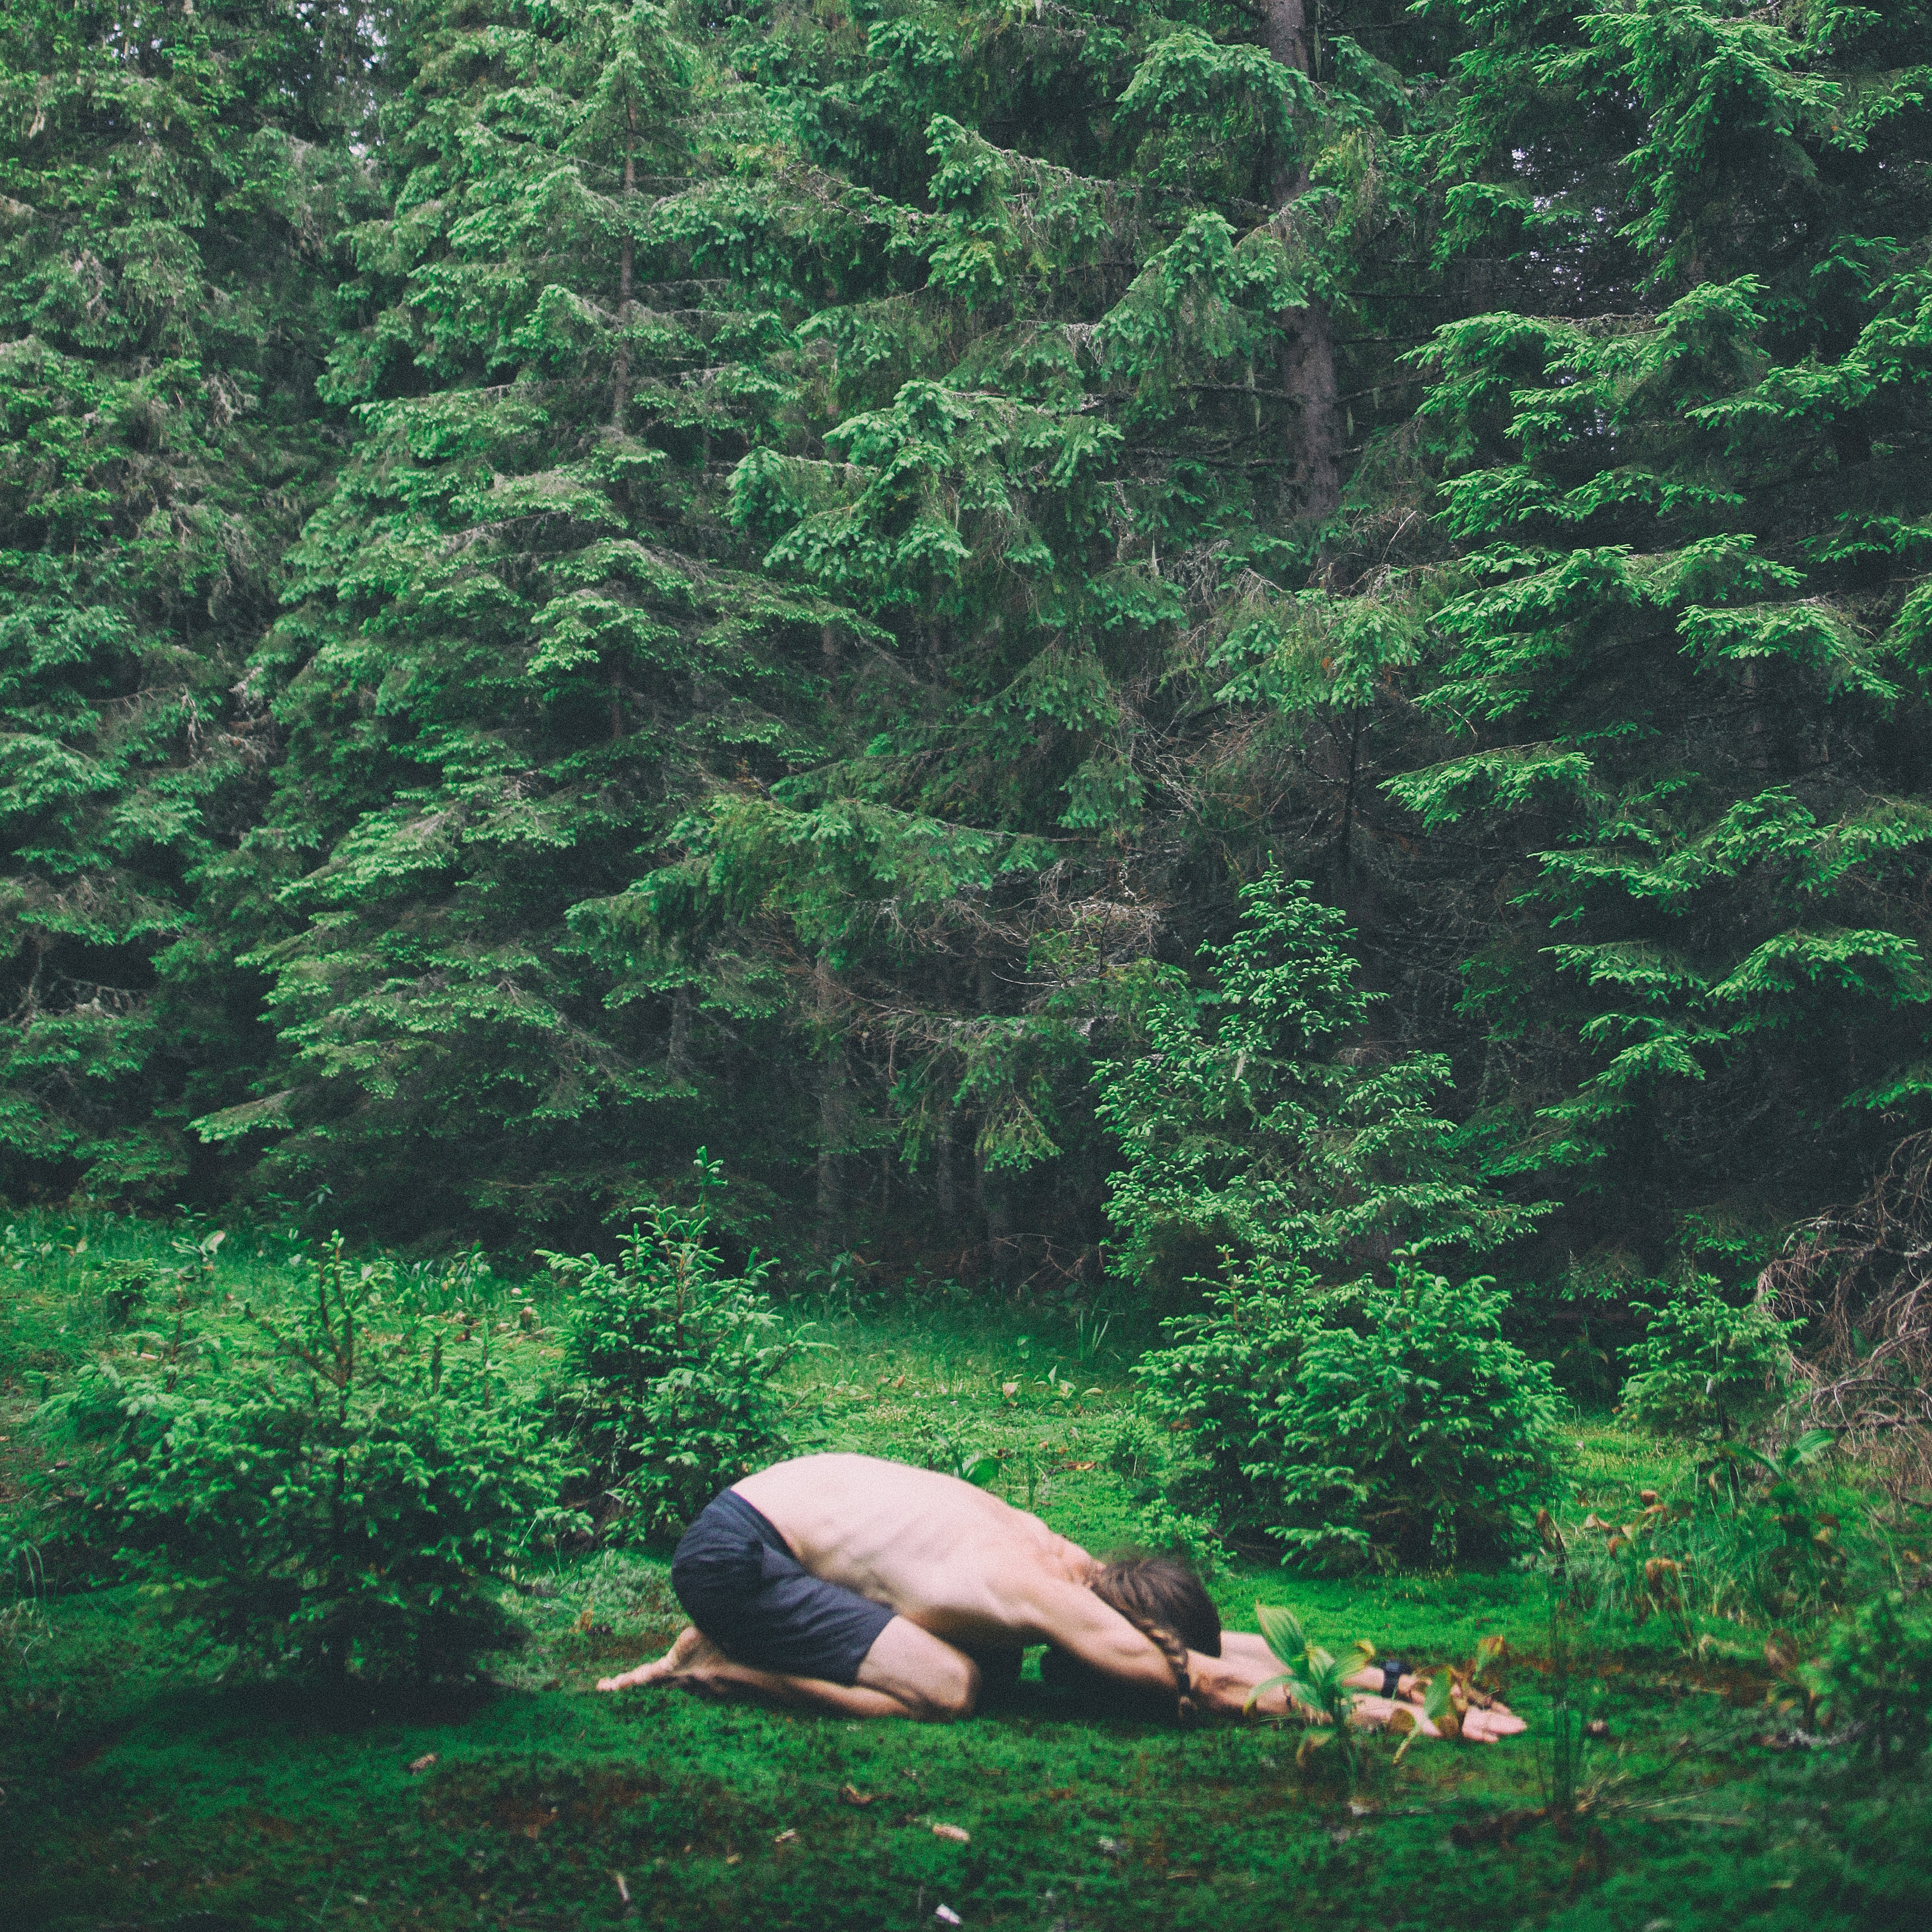 A man doing child yoga pose in the forest.